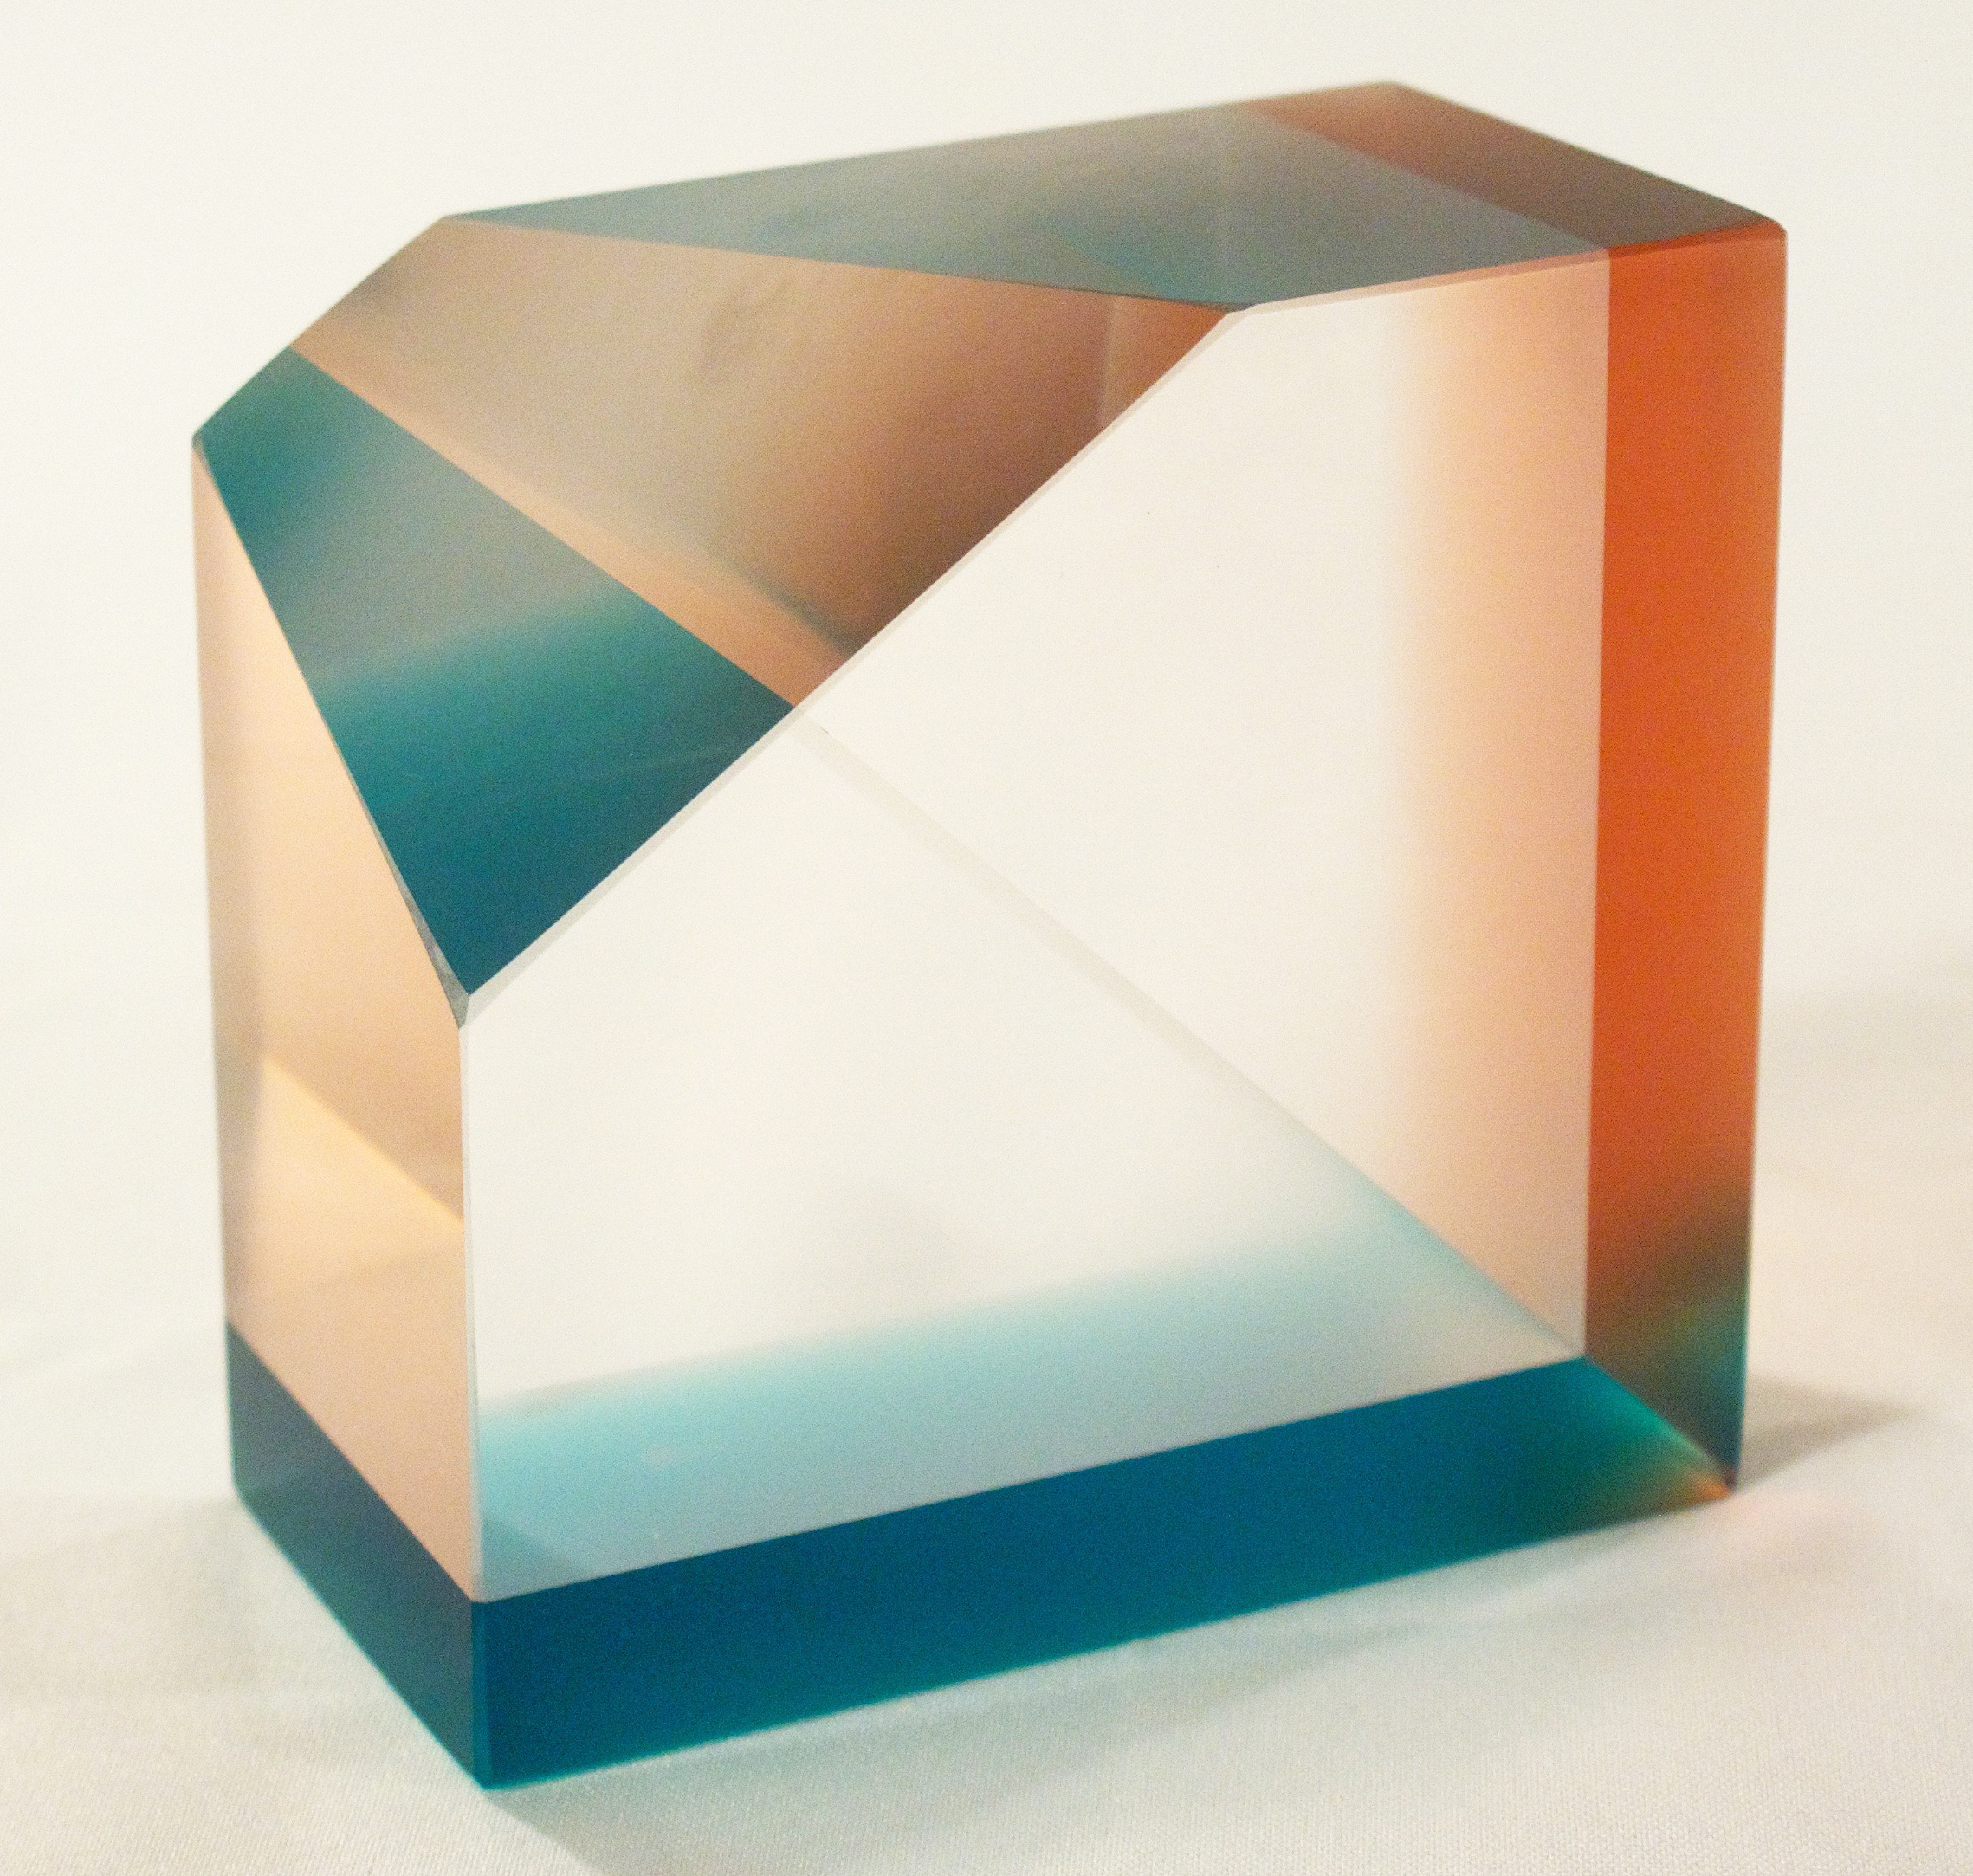  cold-worked optical glass  assembled  2015  donated to CMoG&nbsp; 